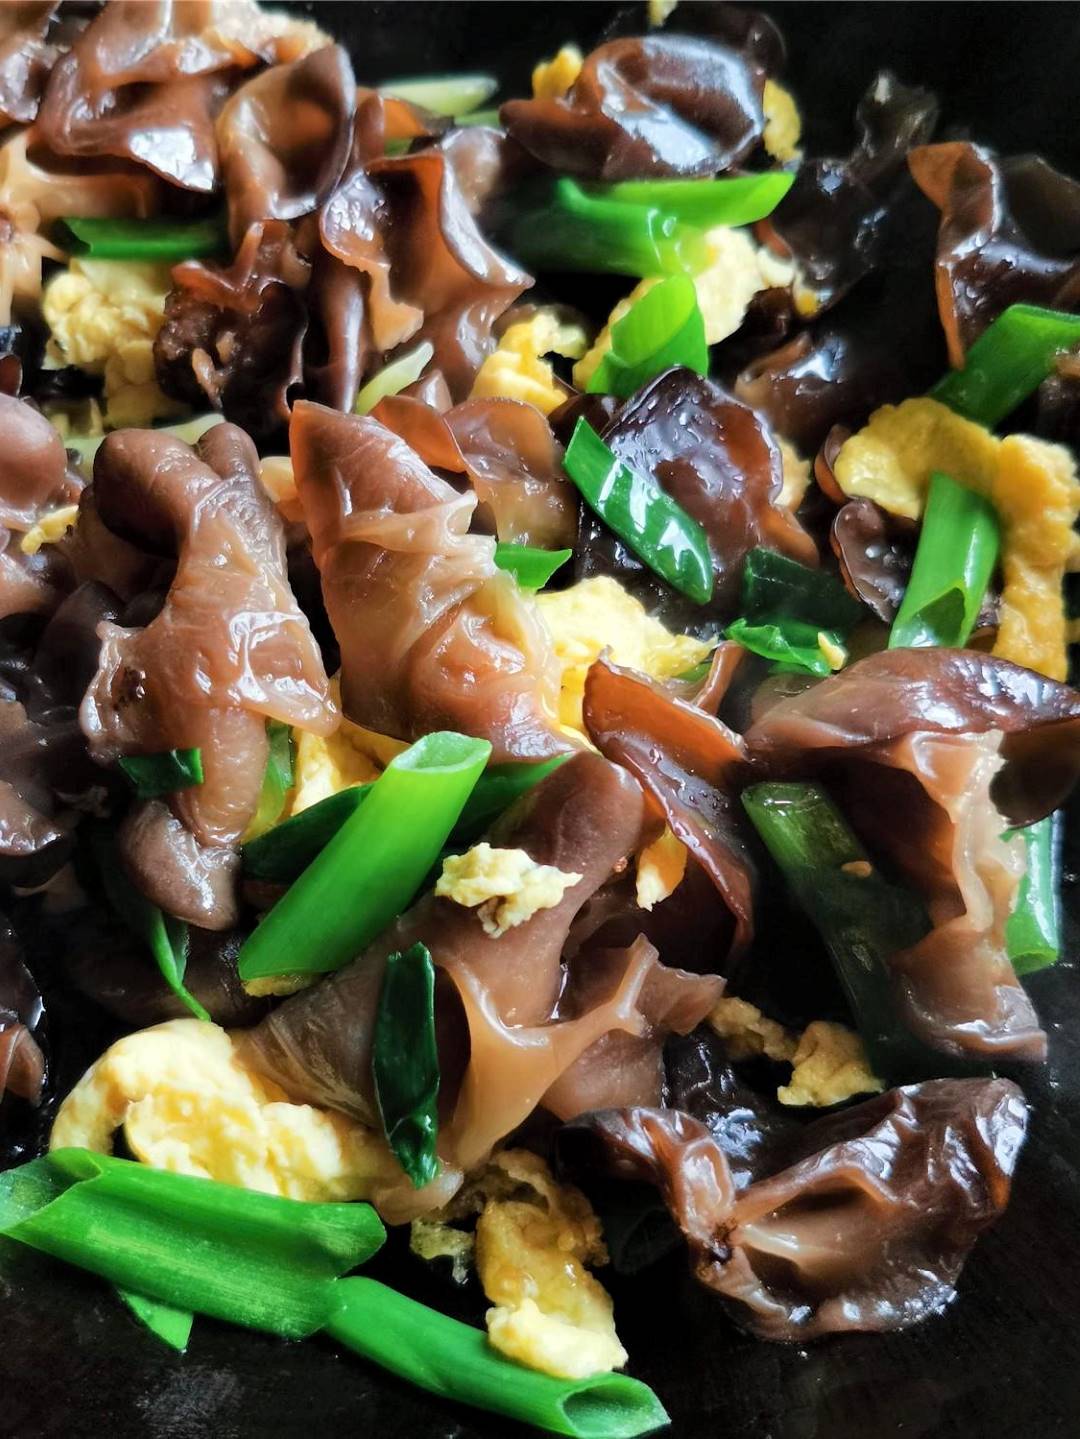 Scrambled Eggs with Black Fungus and green onion recipe for black fungus 07